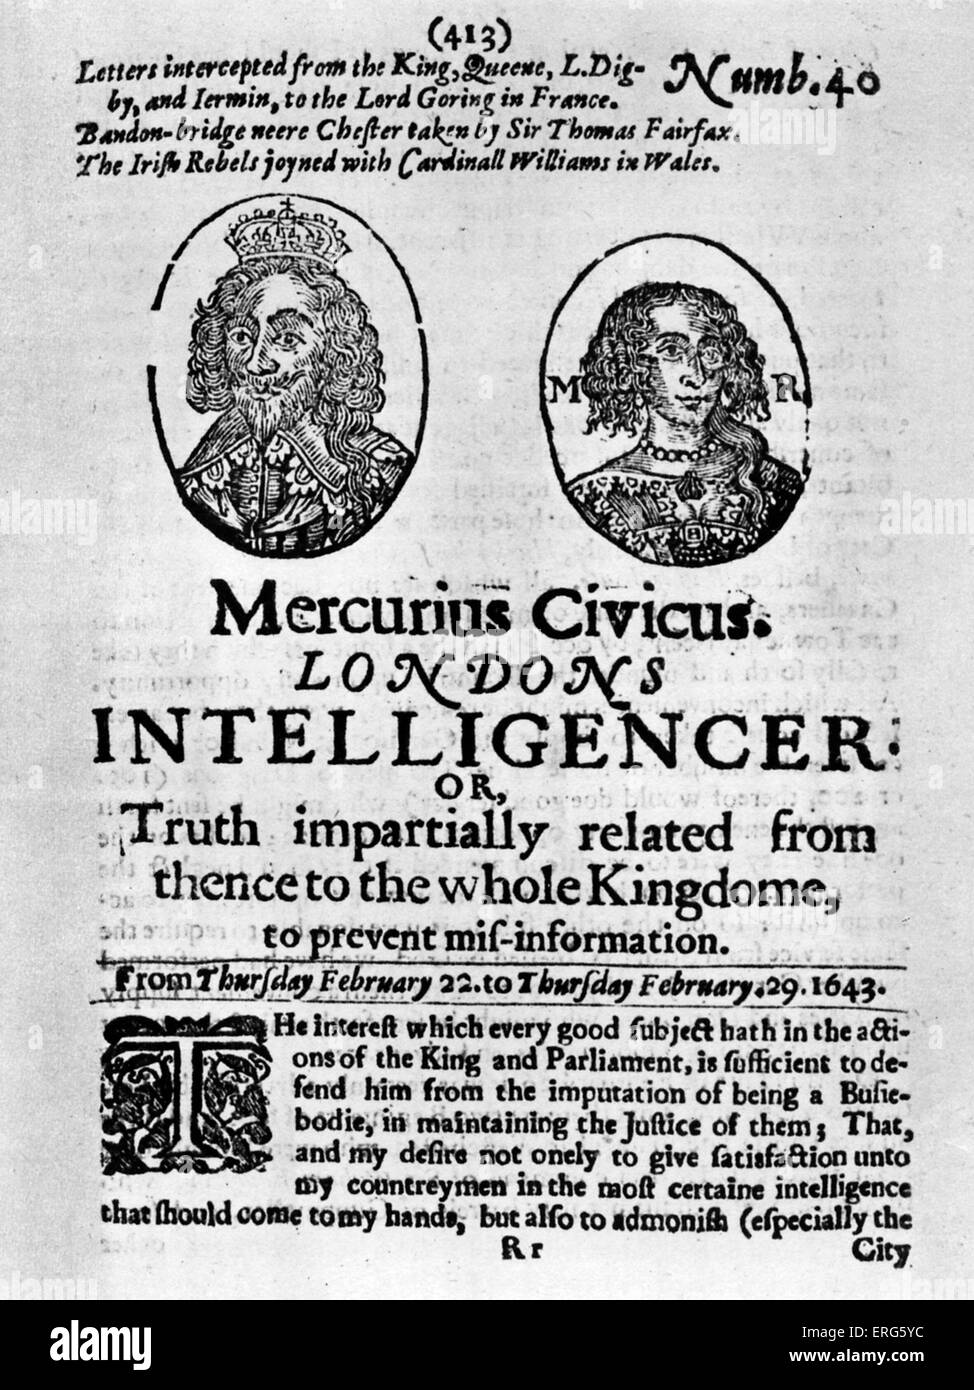 Early newspapers - ' Mercurius Civicus: London 's Intelligencer or Truth impartially related from thence to the whole Kingdome, Stock Photo